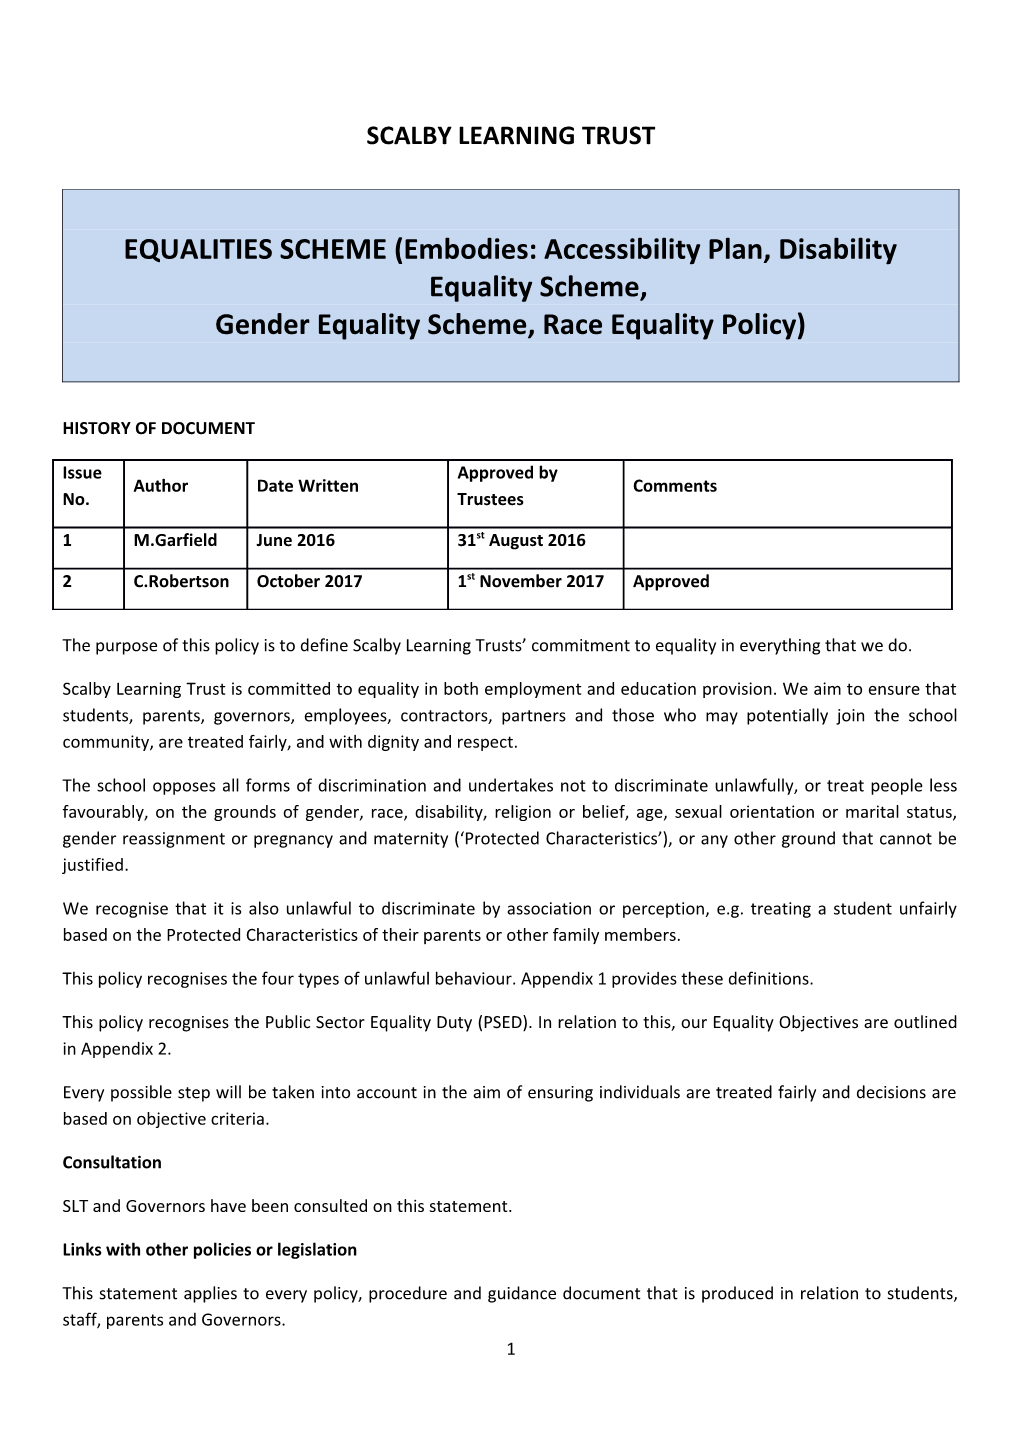 EQUALITIES SCHEME (Embodies: Accessibility Plan, Disability Equality Scheme